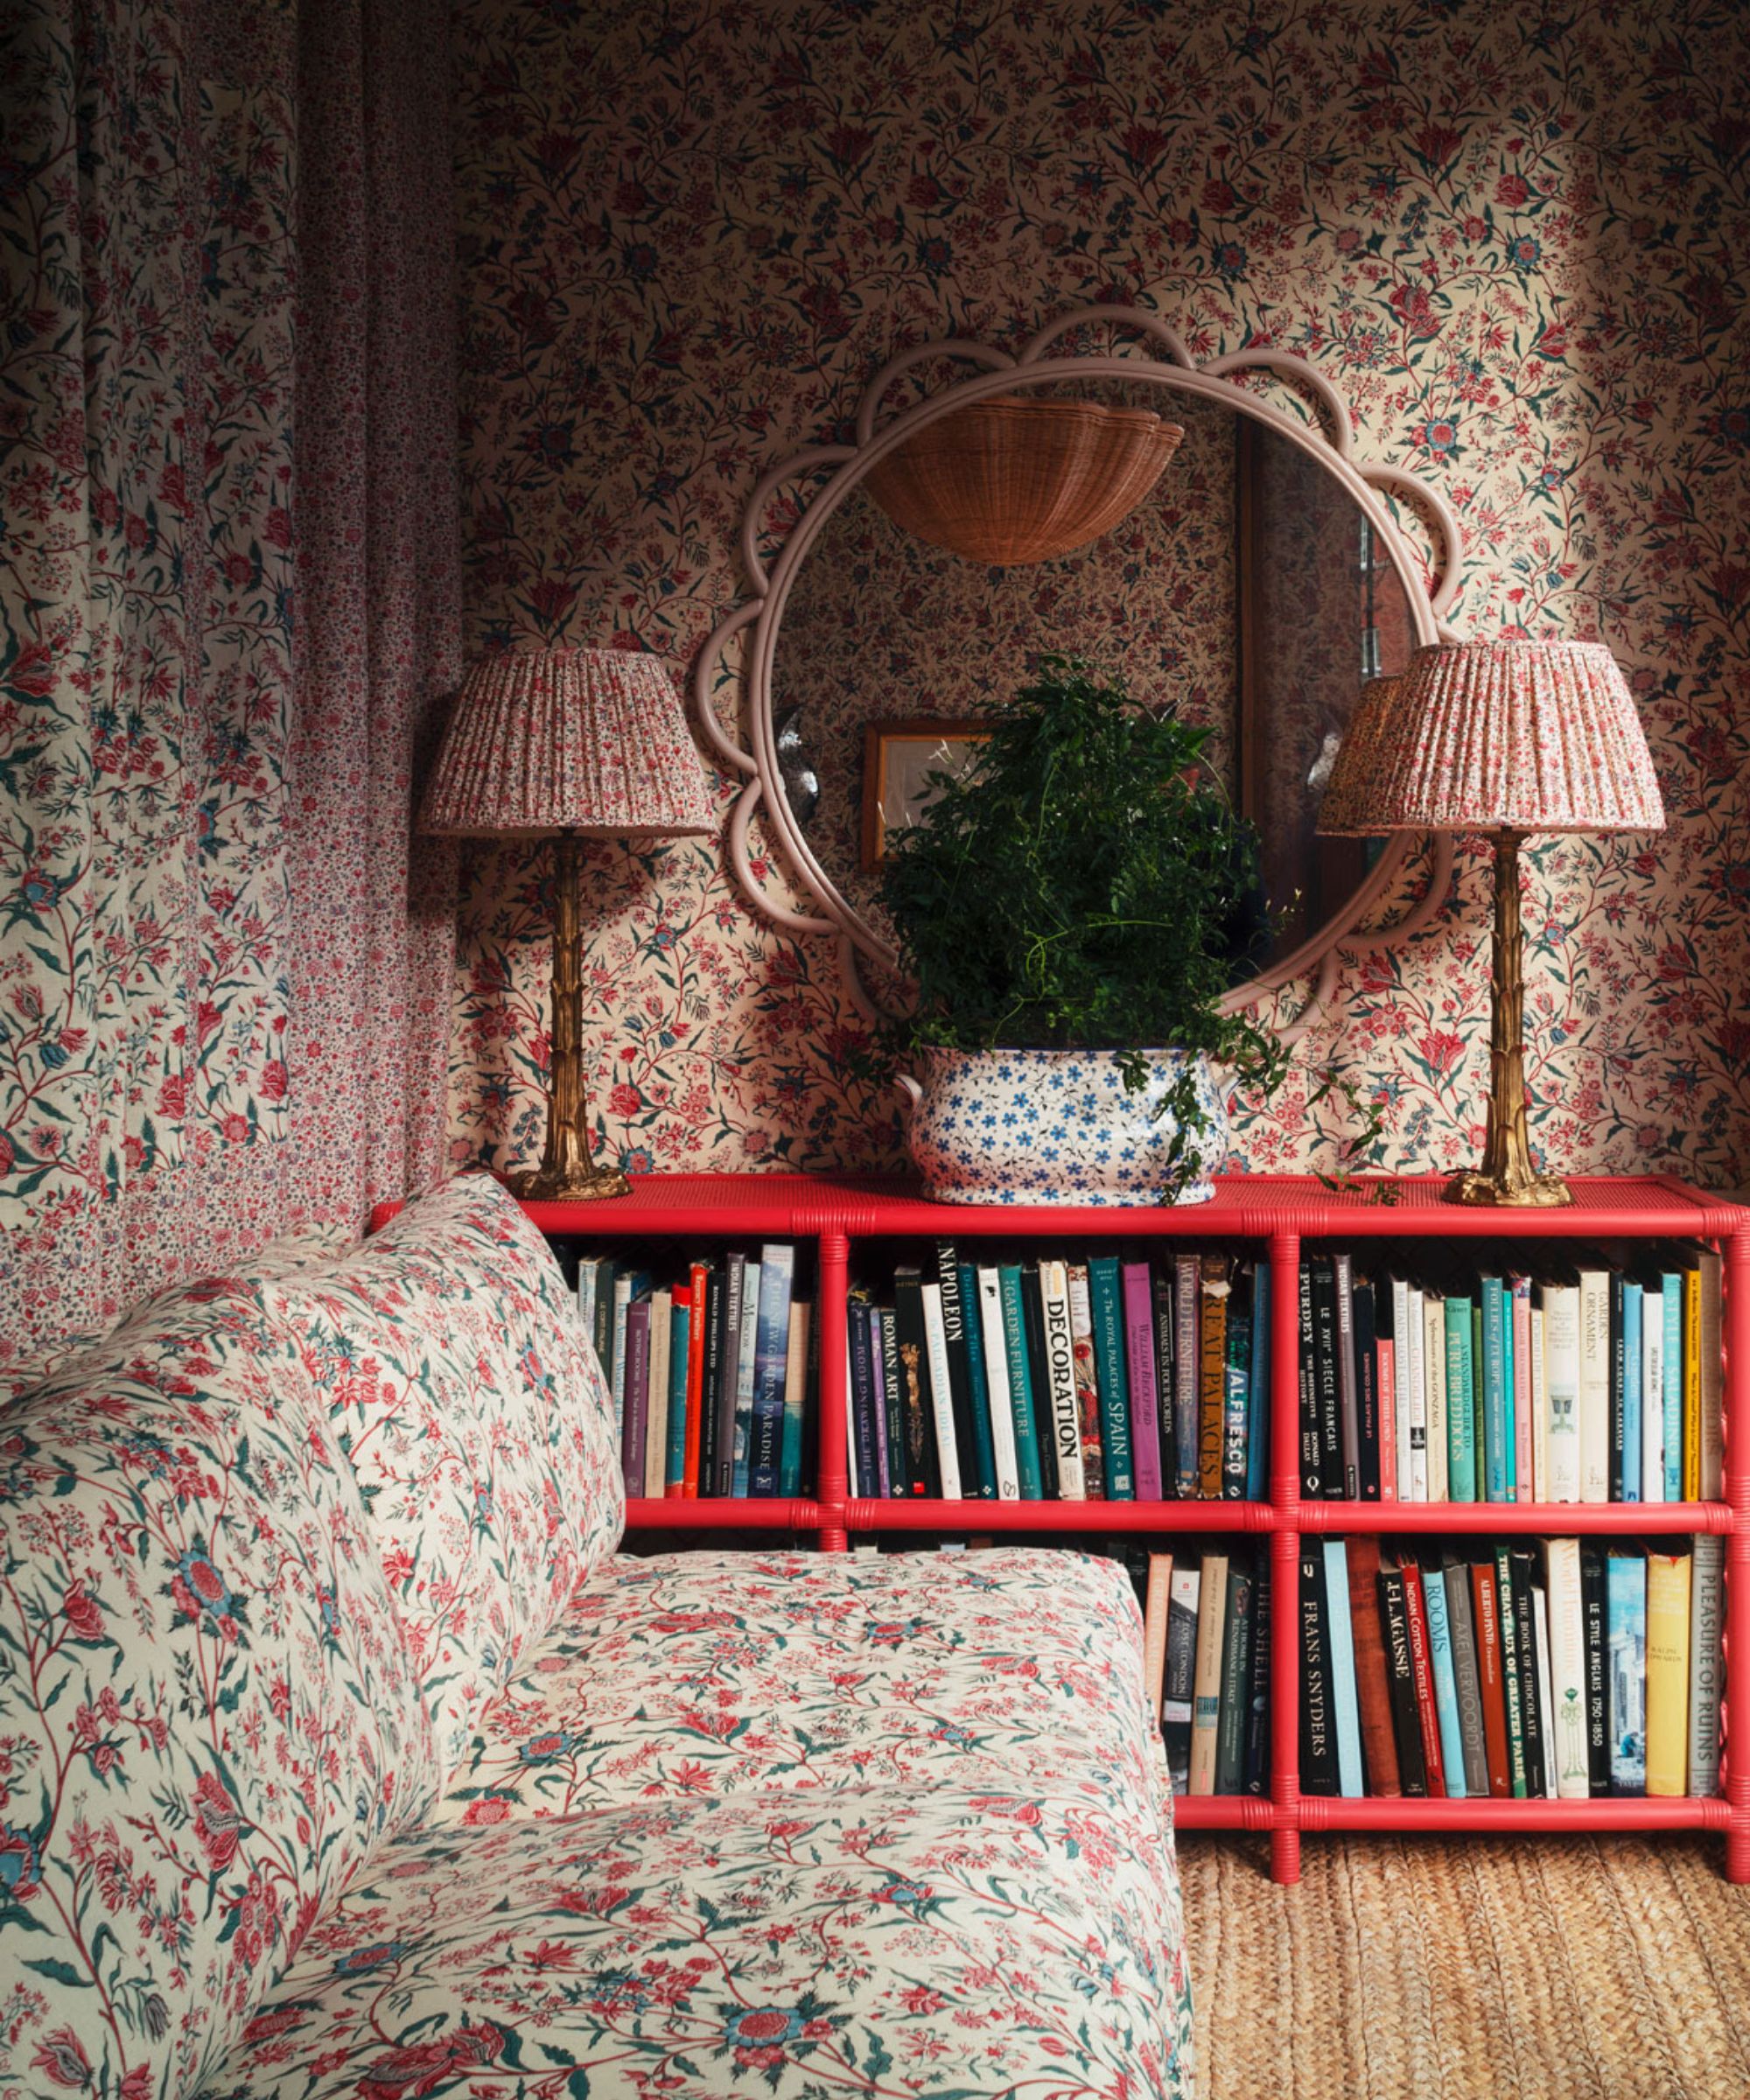 Pink and red living room with floral wallpaper and fabric, red book shelf, two matching lamps